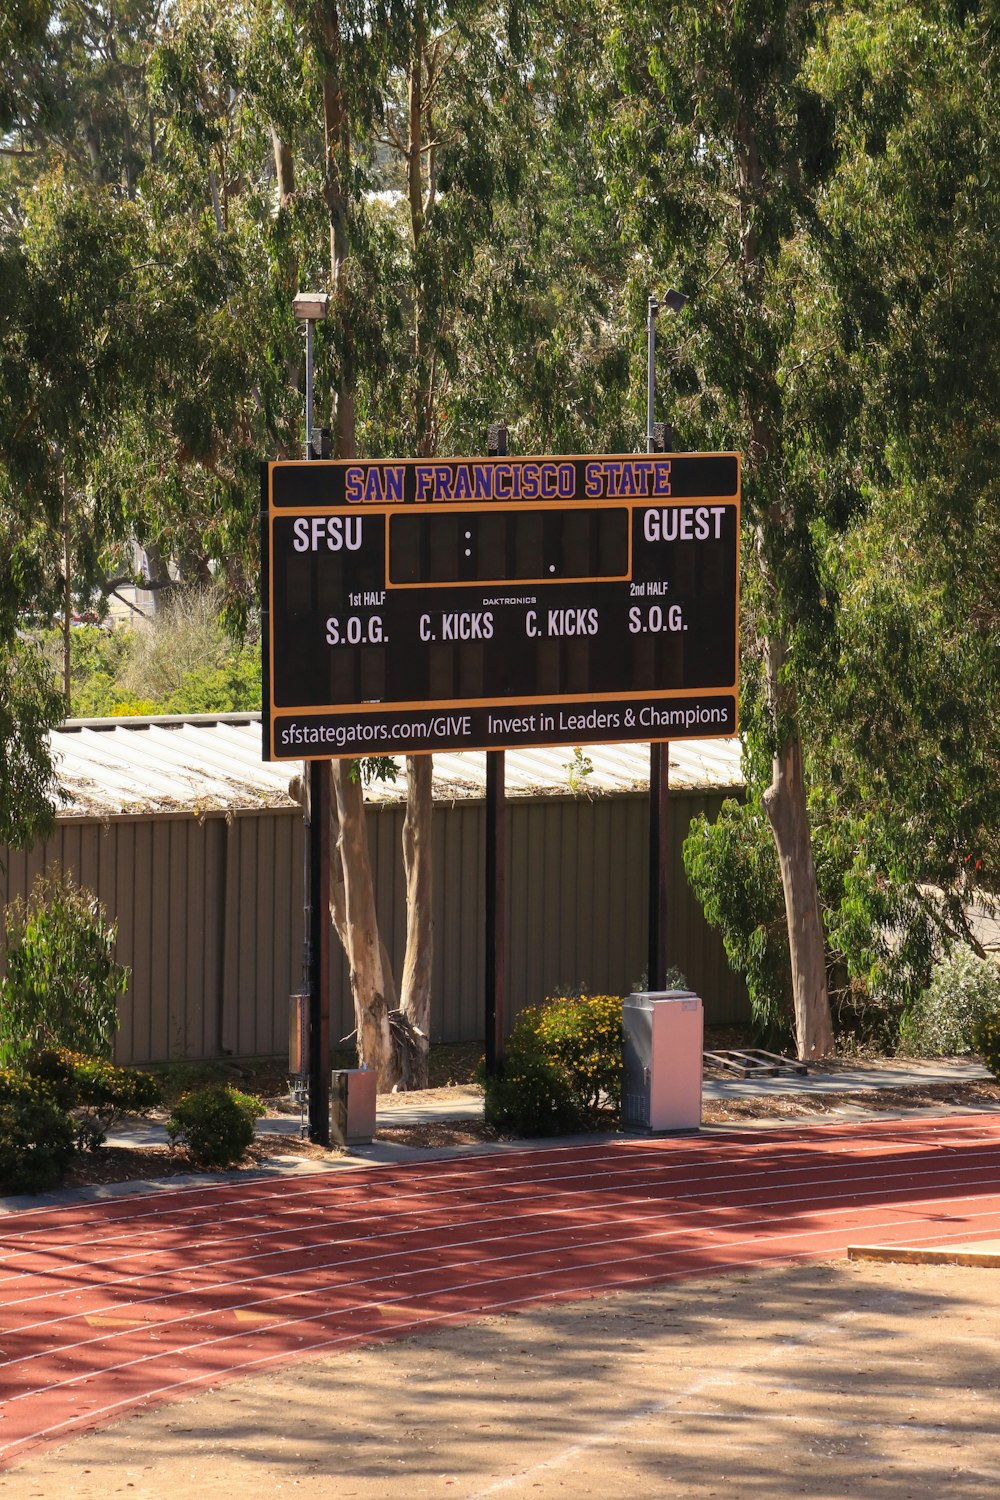 a scoreboard in front of a building with trees in the background